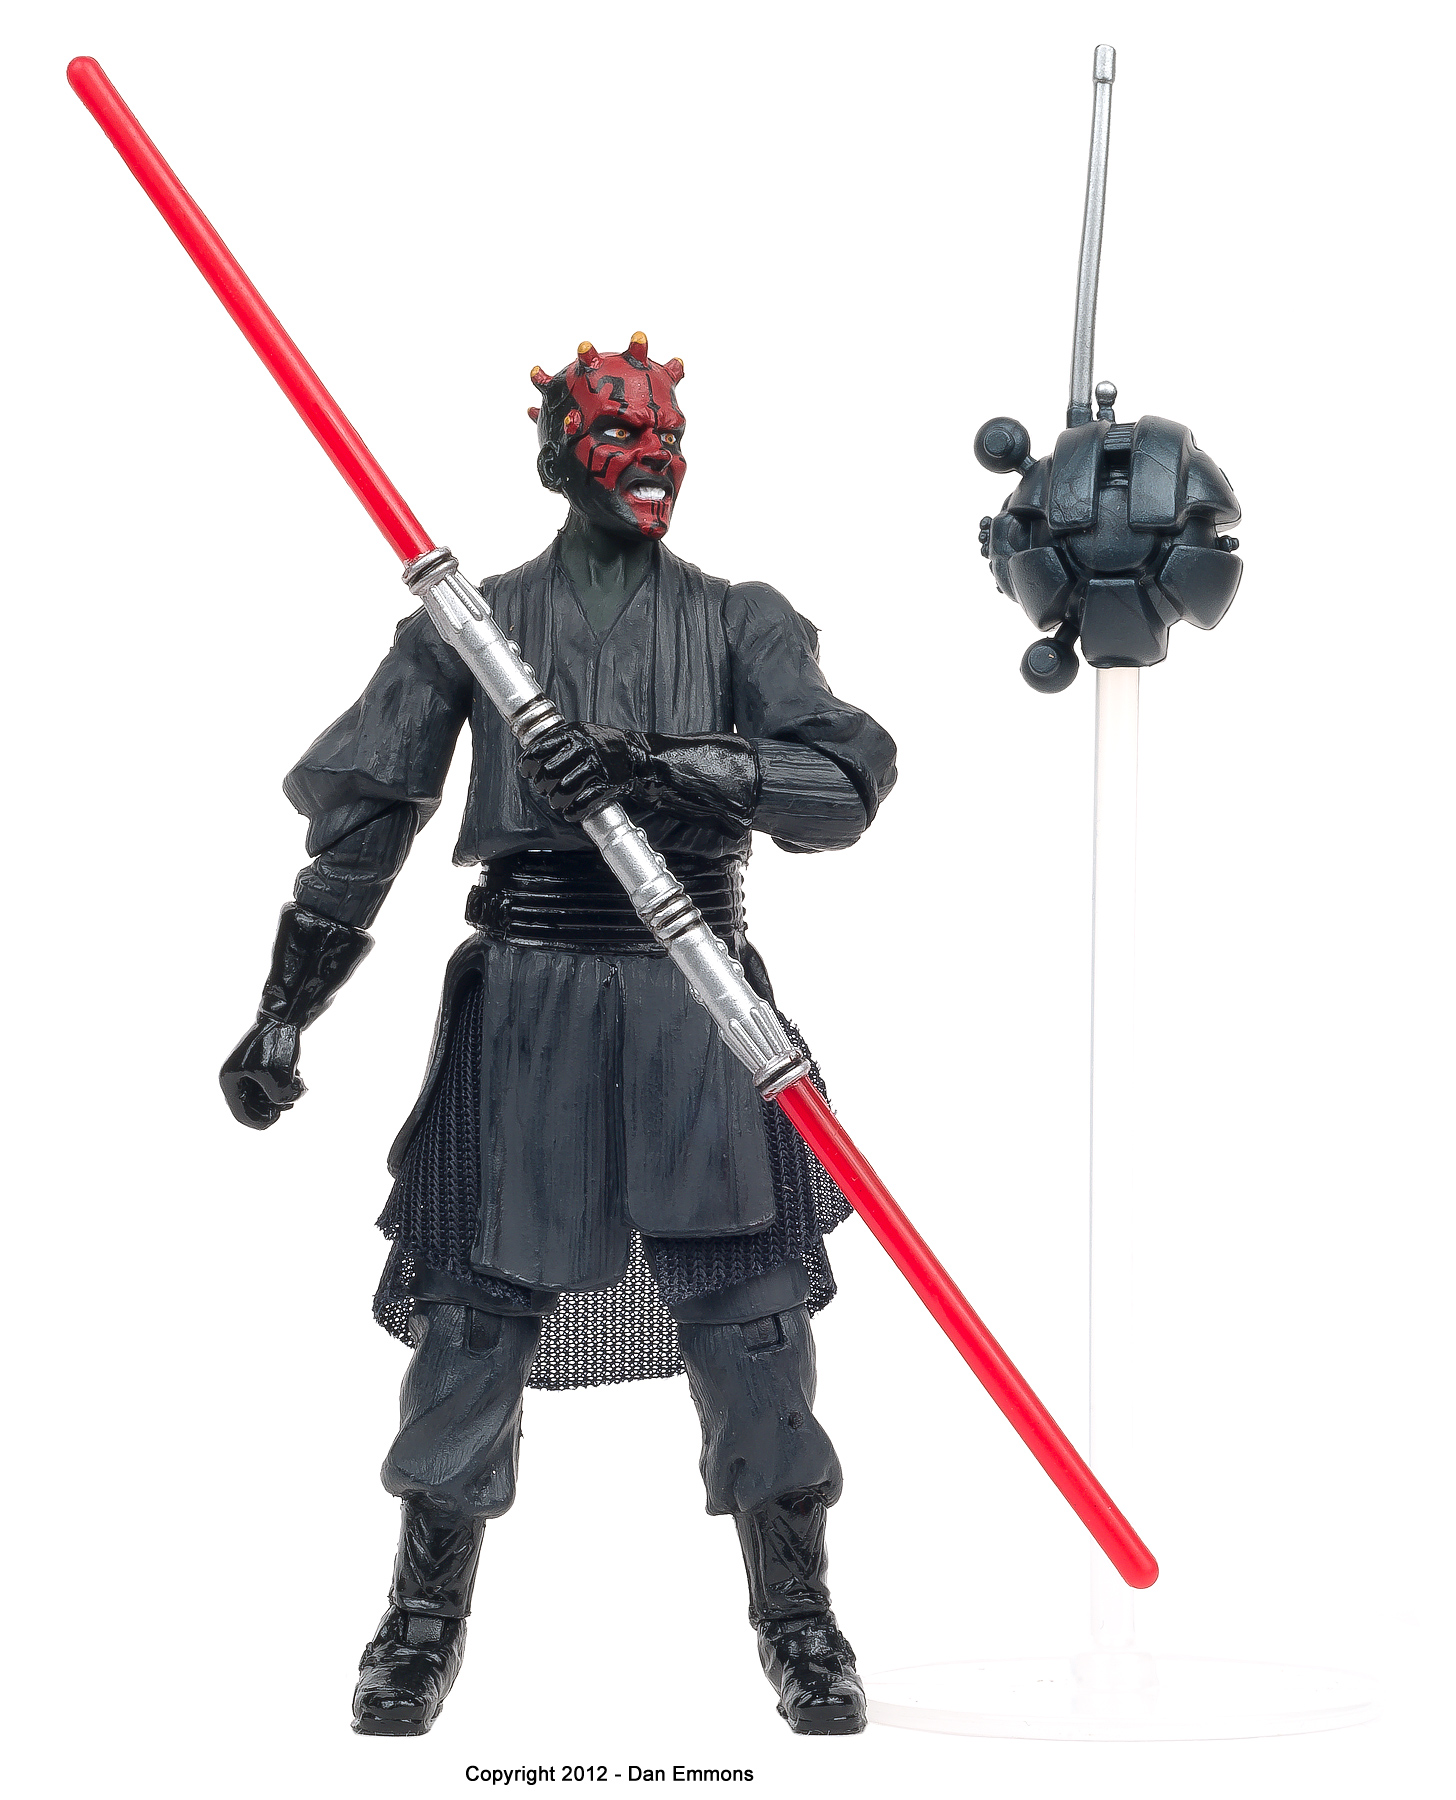 Discover The Force – 2: Darth Maul